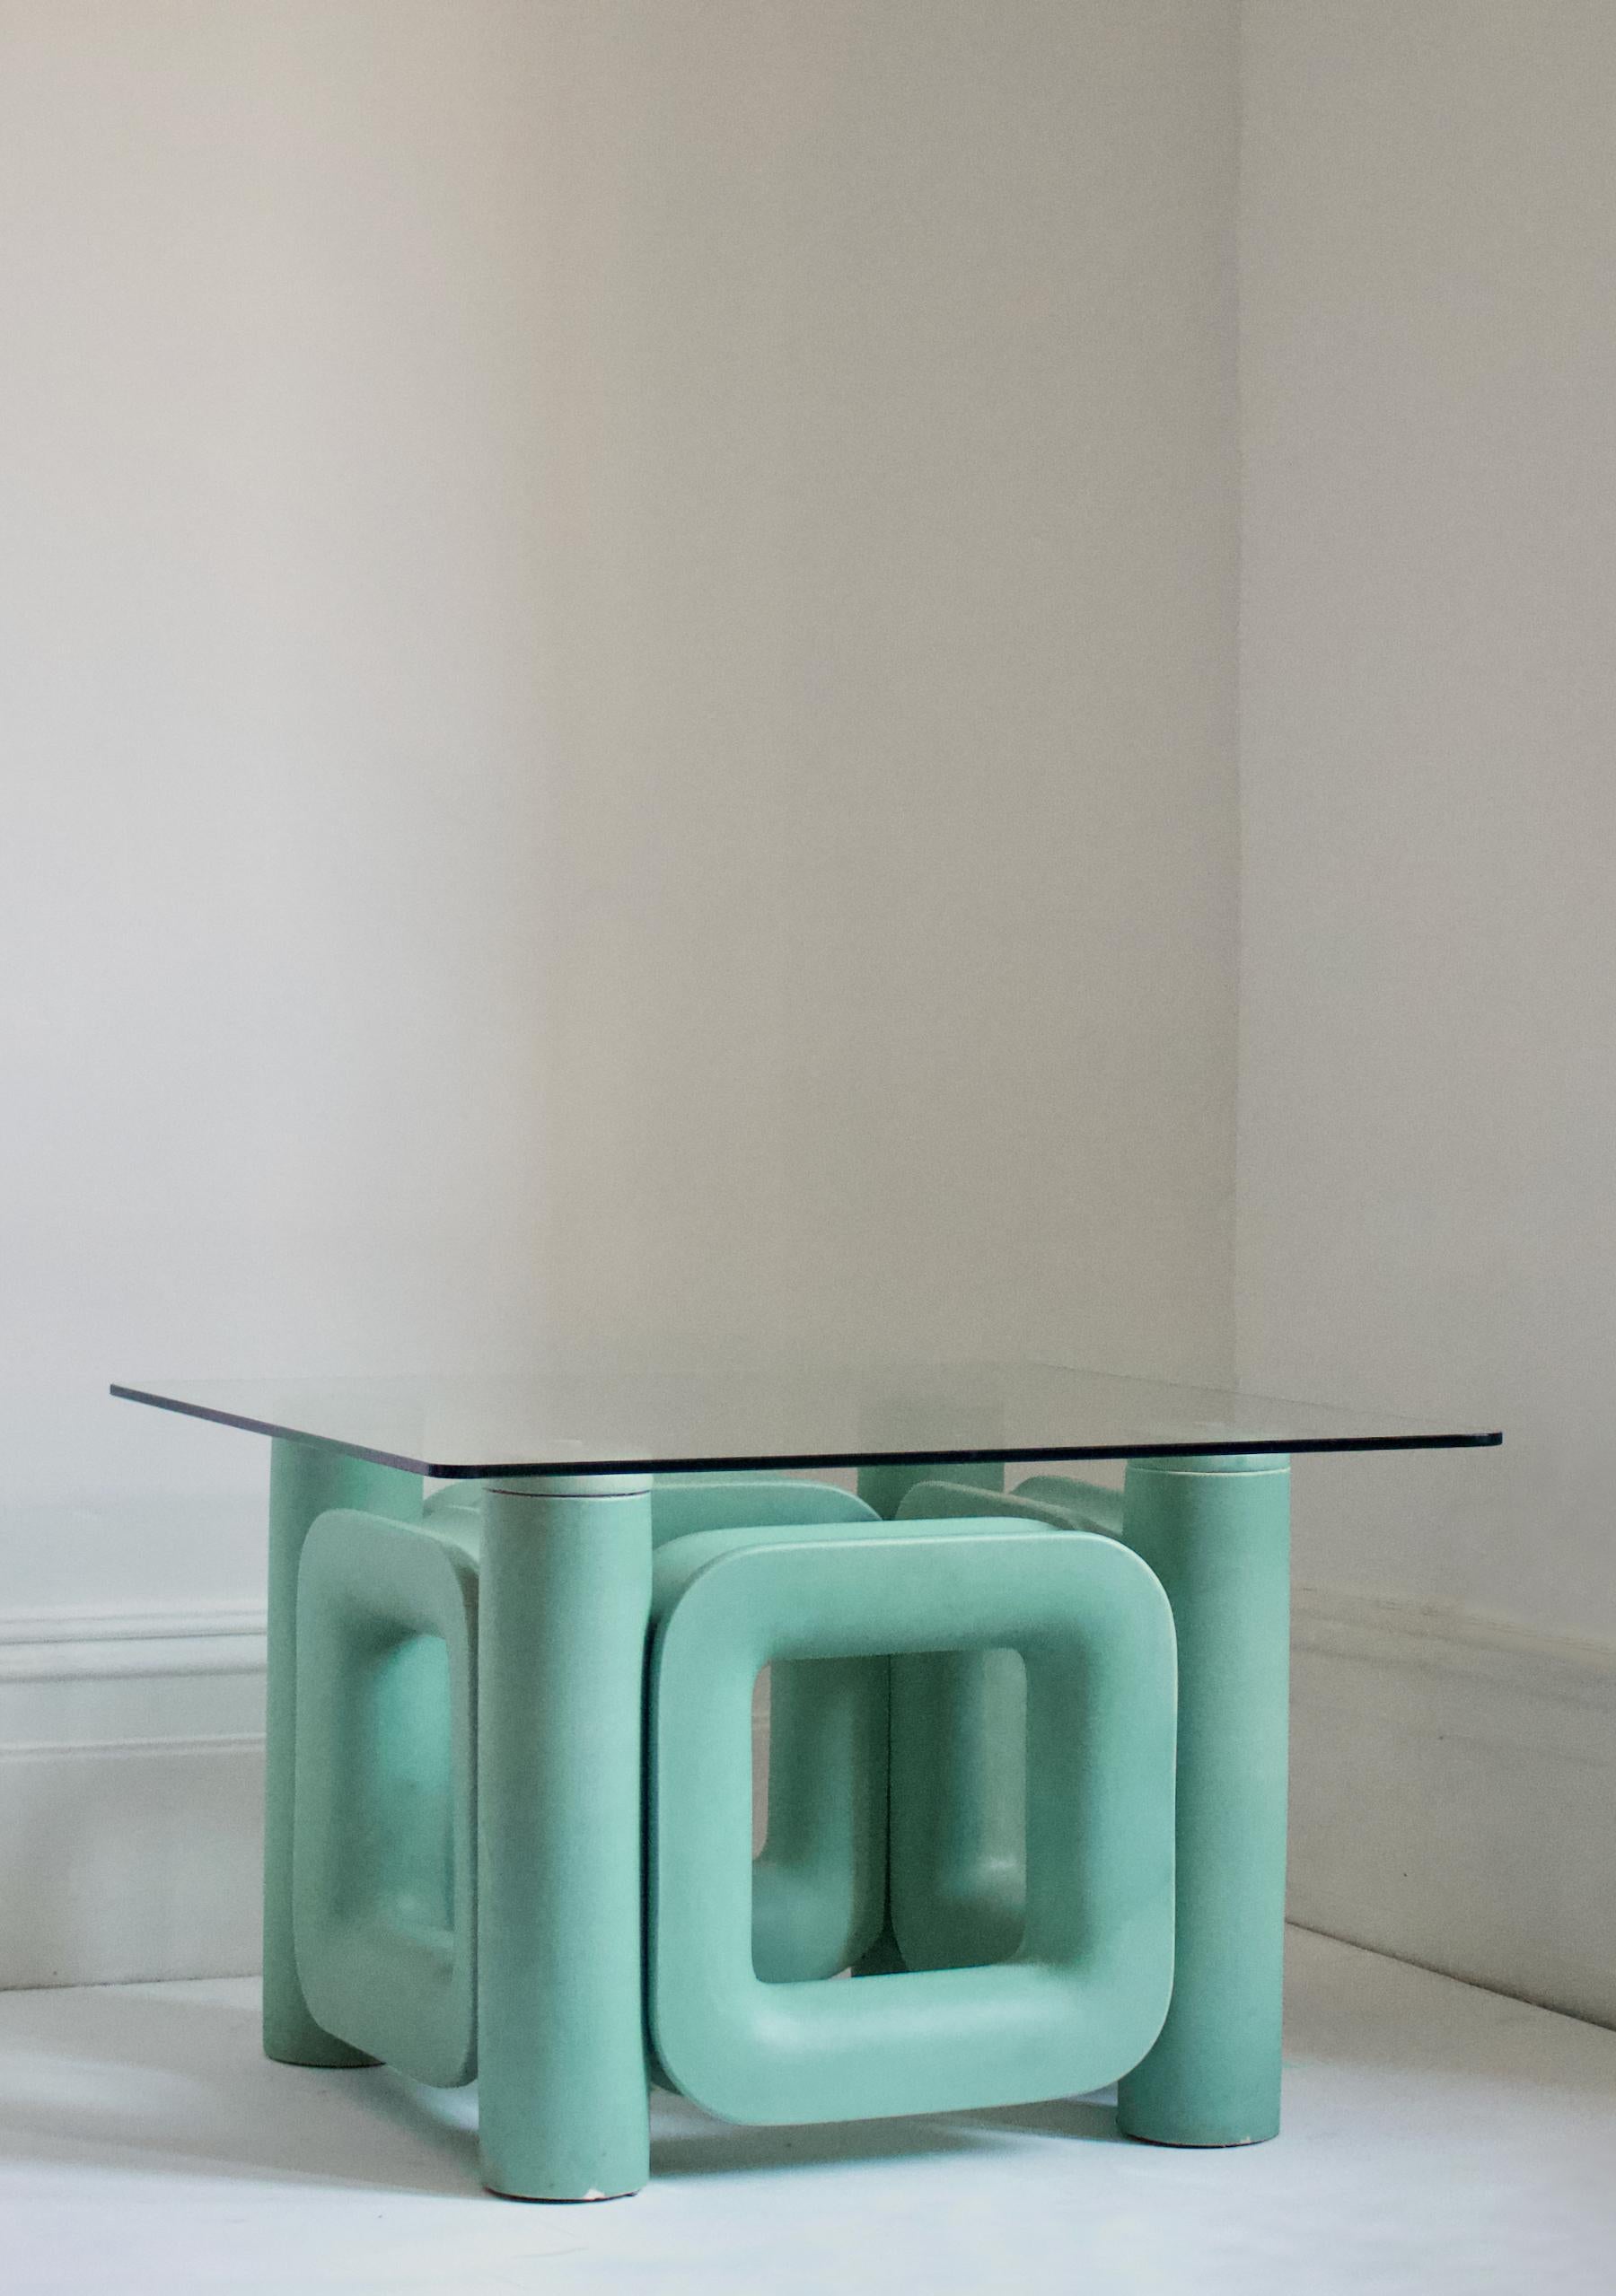 Post-Modern Sculptural Ceramic Coffee Table with Blue-Turquoise Satin Glaze, Italy, 1970s